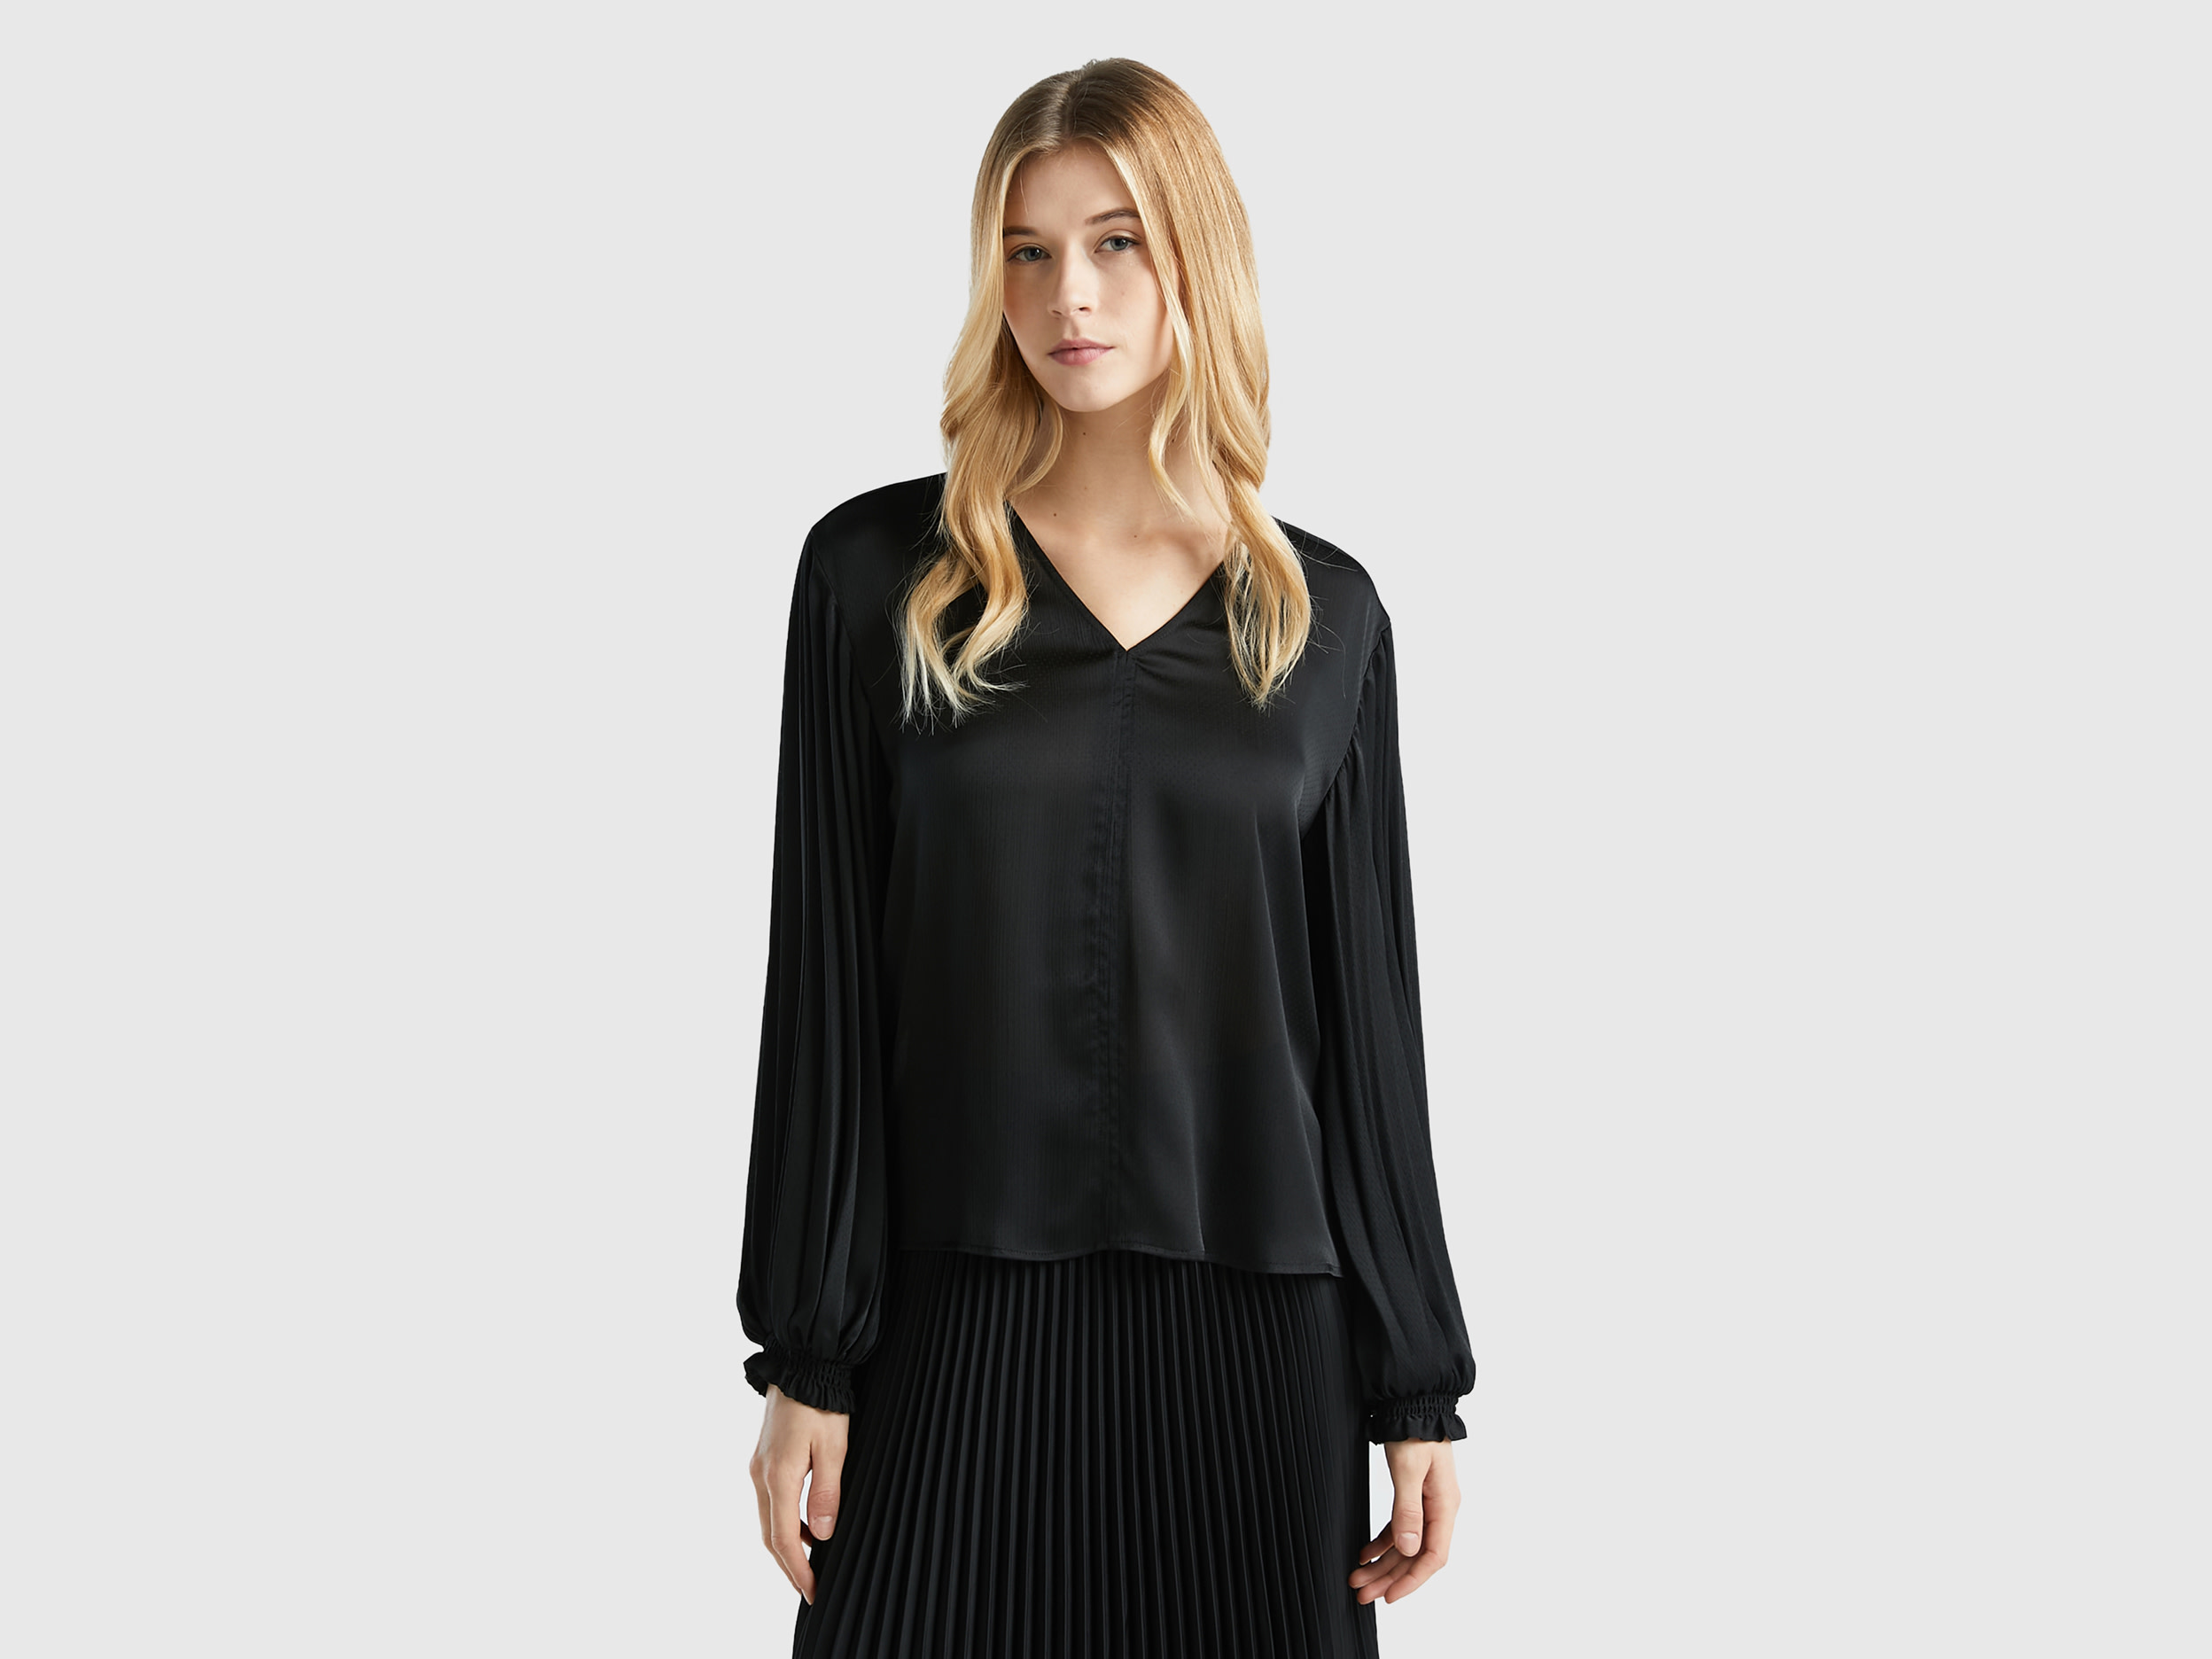 Benetton, Blouse With Long Pleated Sleeves, size S, Black, Women